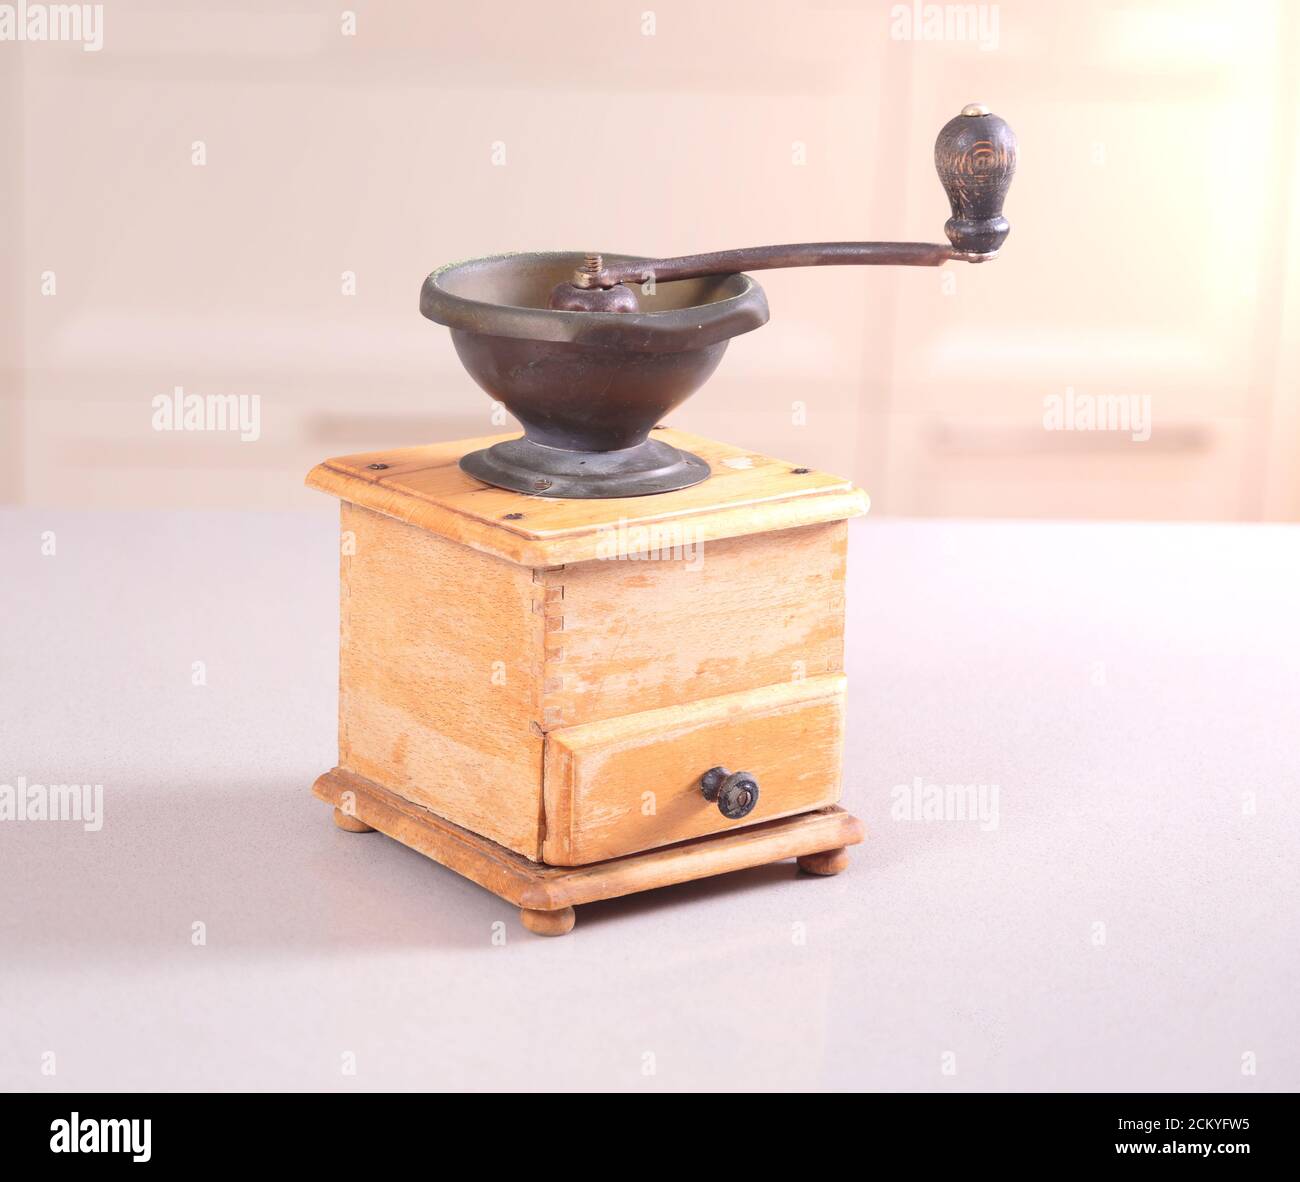 Old obsolete manual coffee grinder made of wood and iron Stock Photo